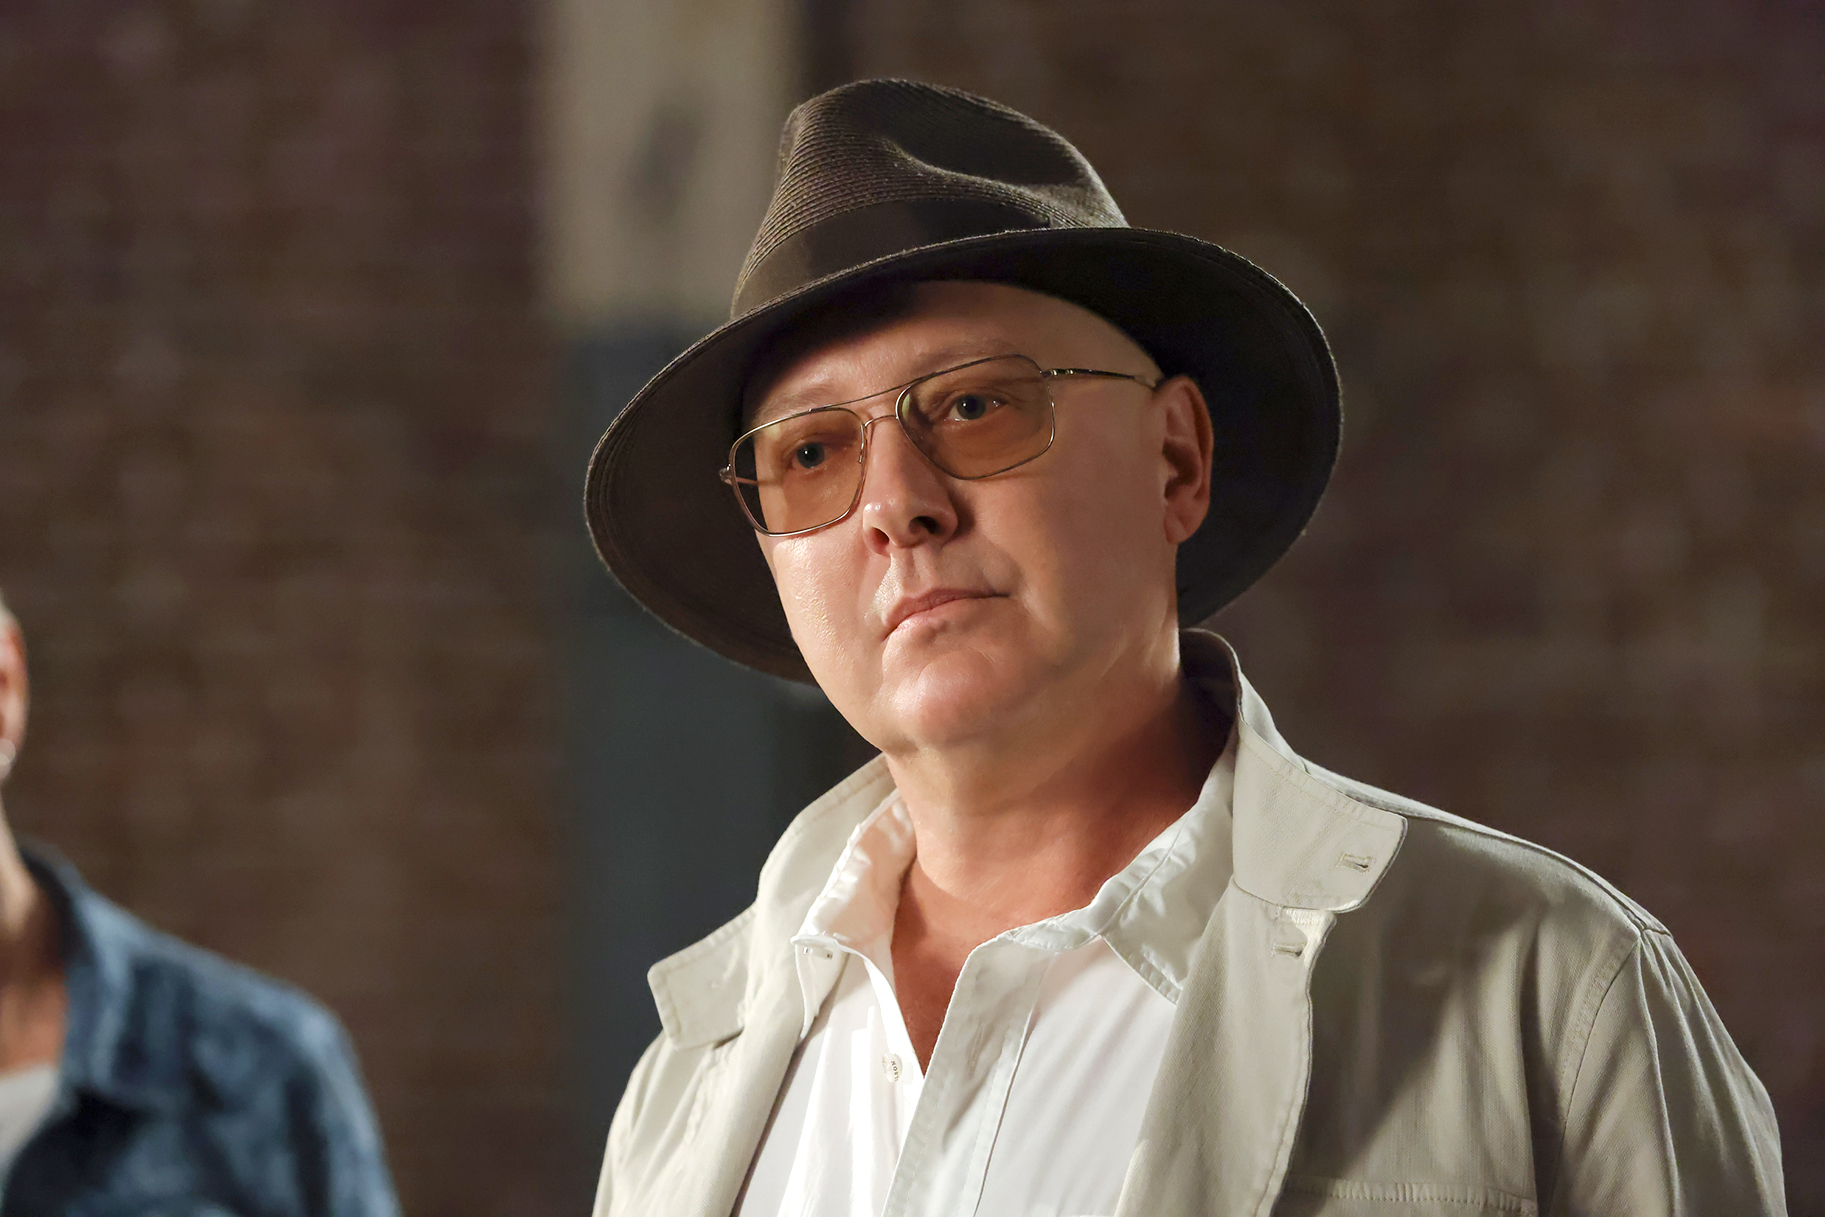 Is This the End for 'The Blacklist'? Fans Wonder About Season 11 as Netflix Wraps Up the Series